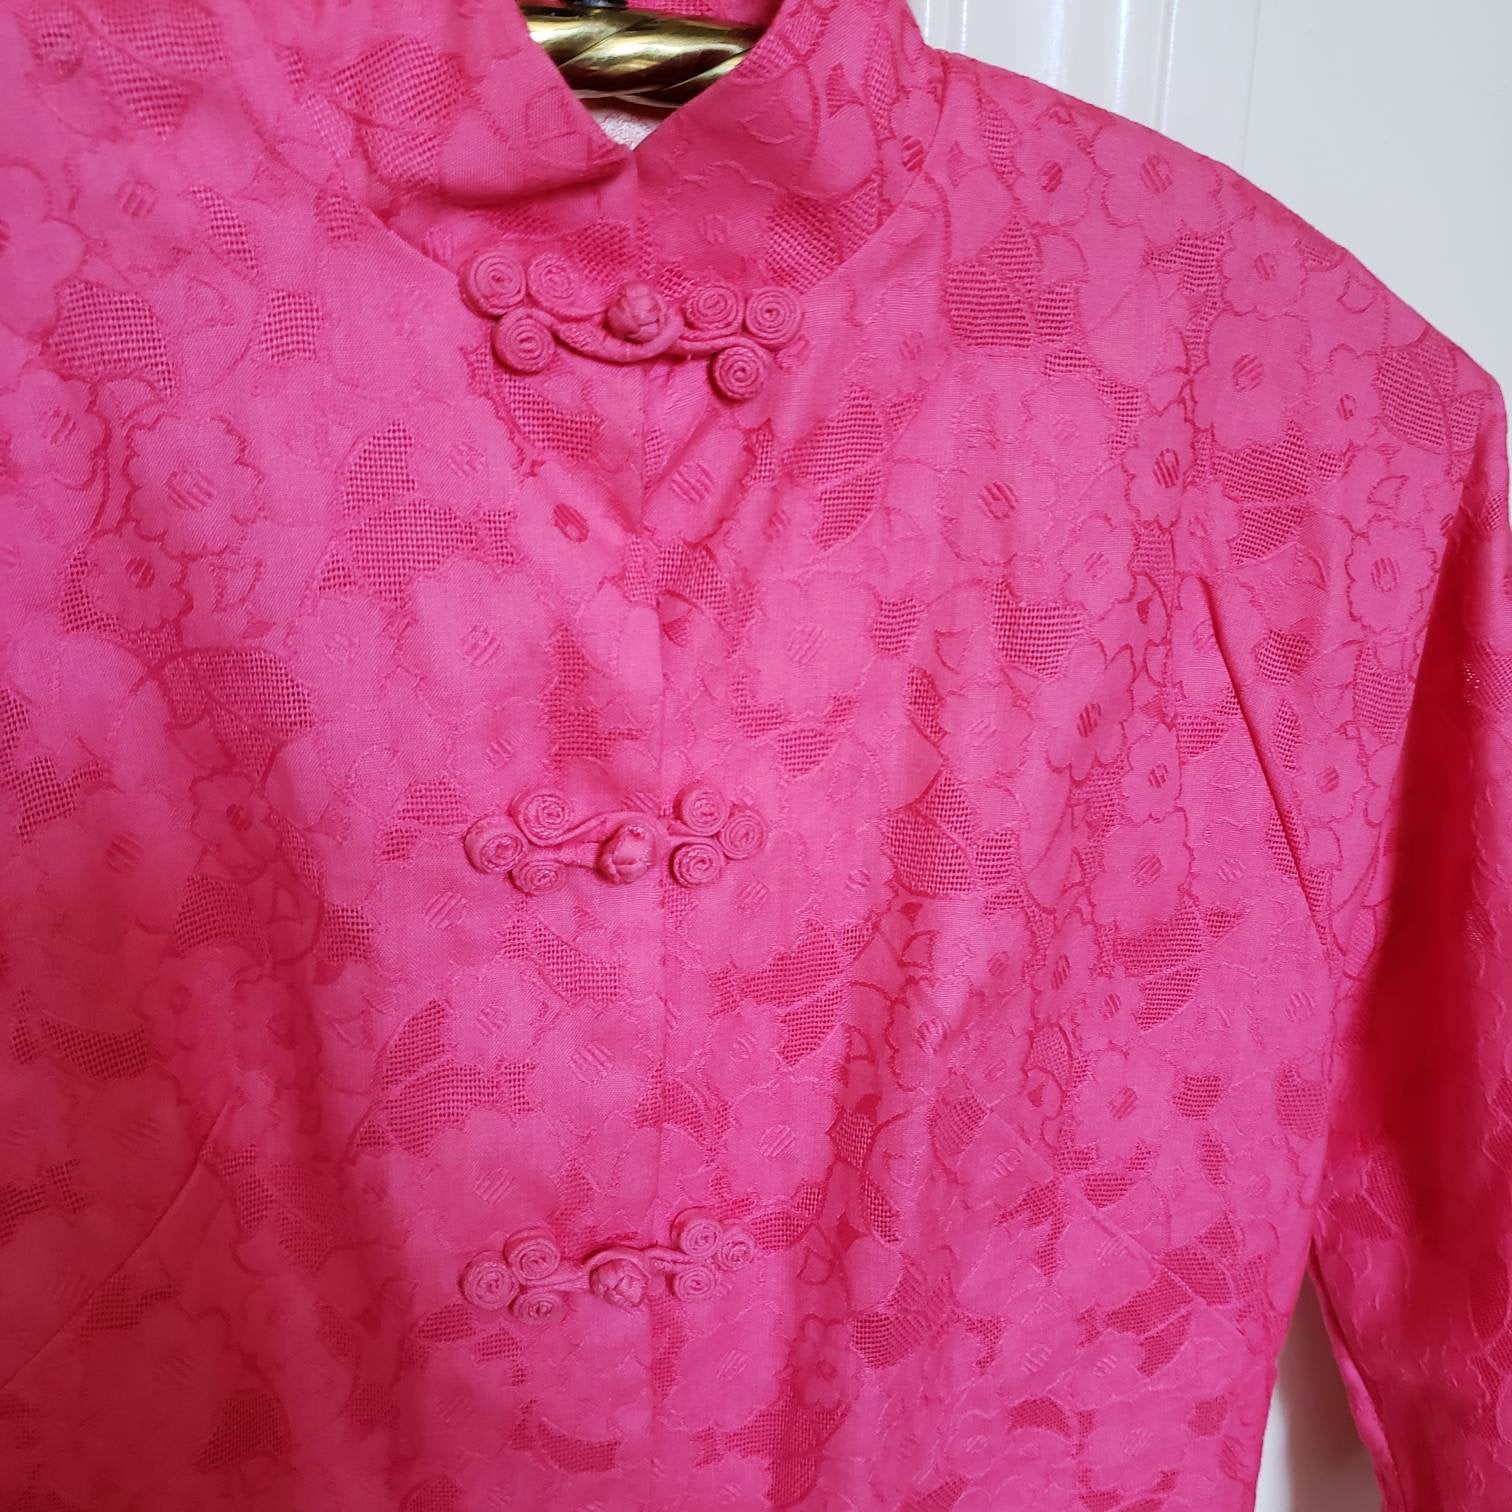 1950s Madame Butterfly top